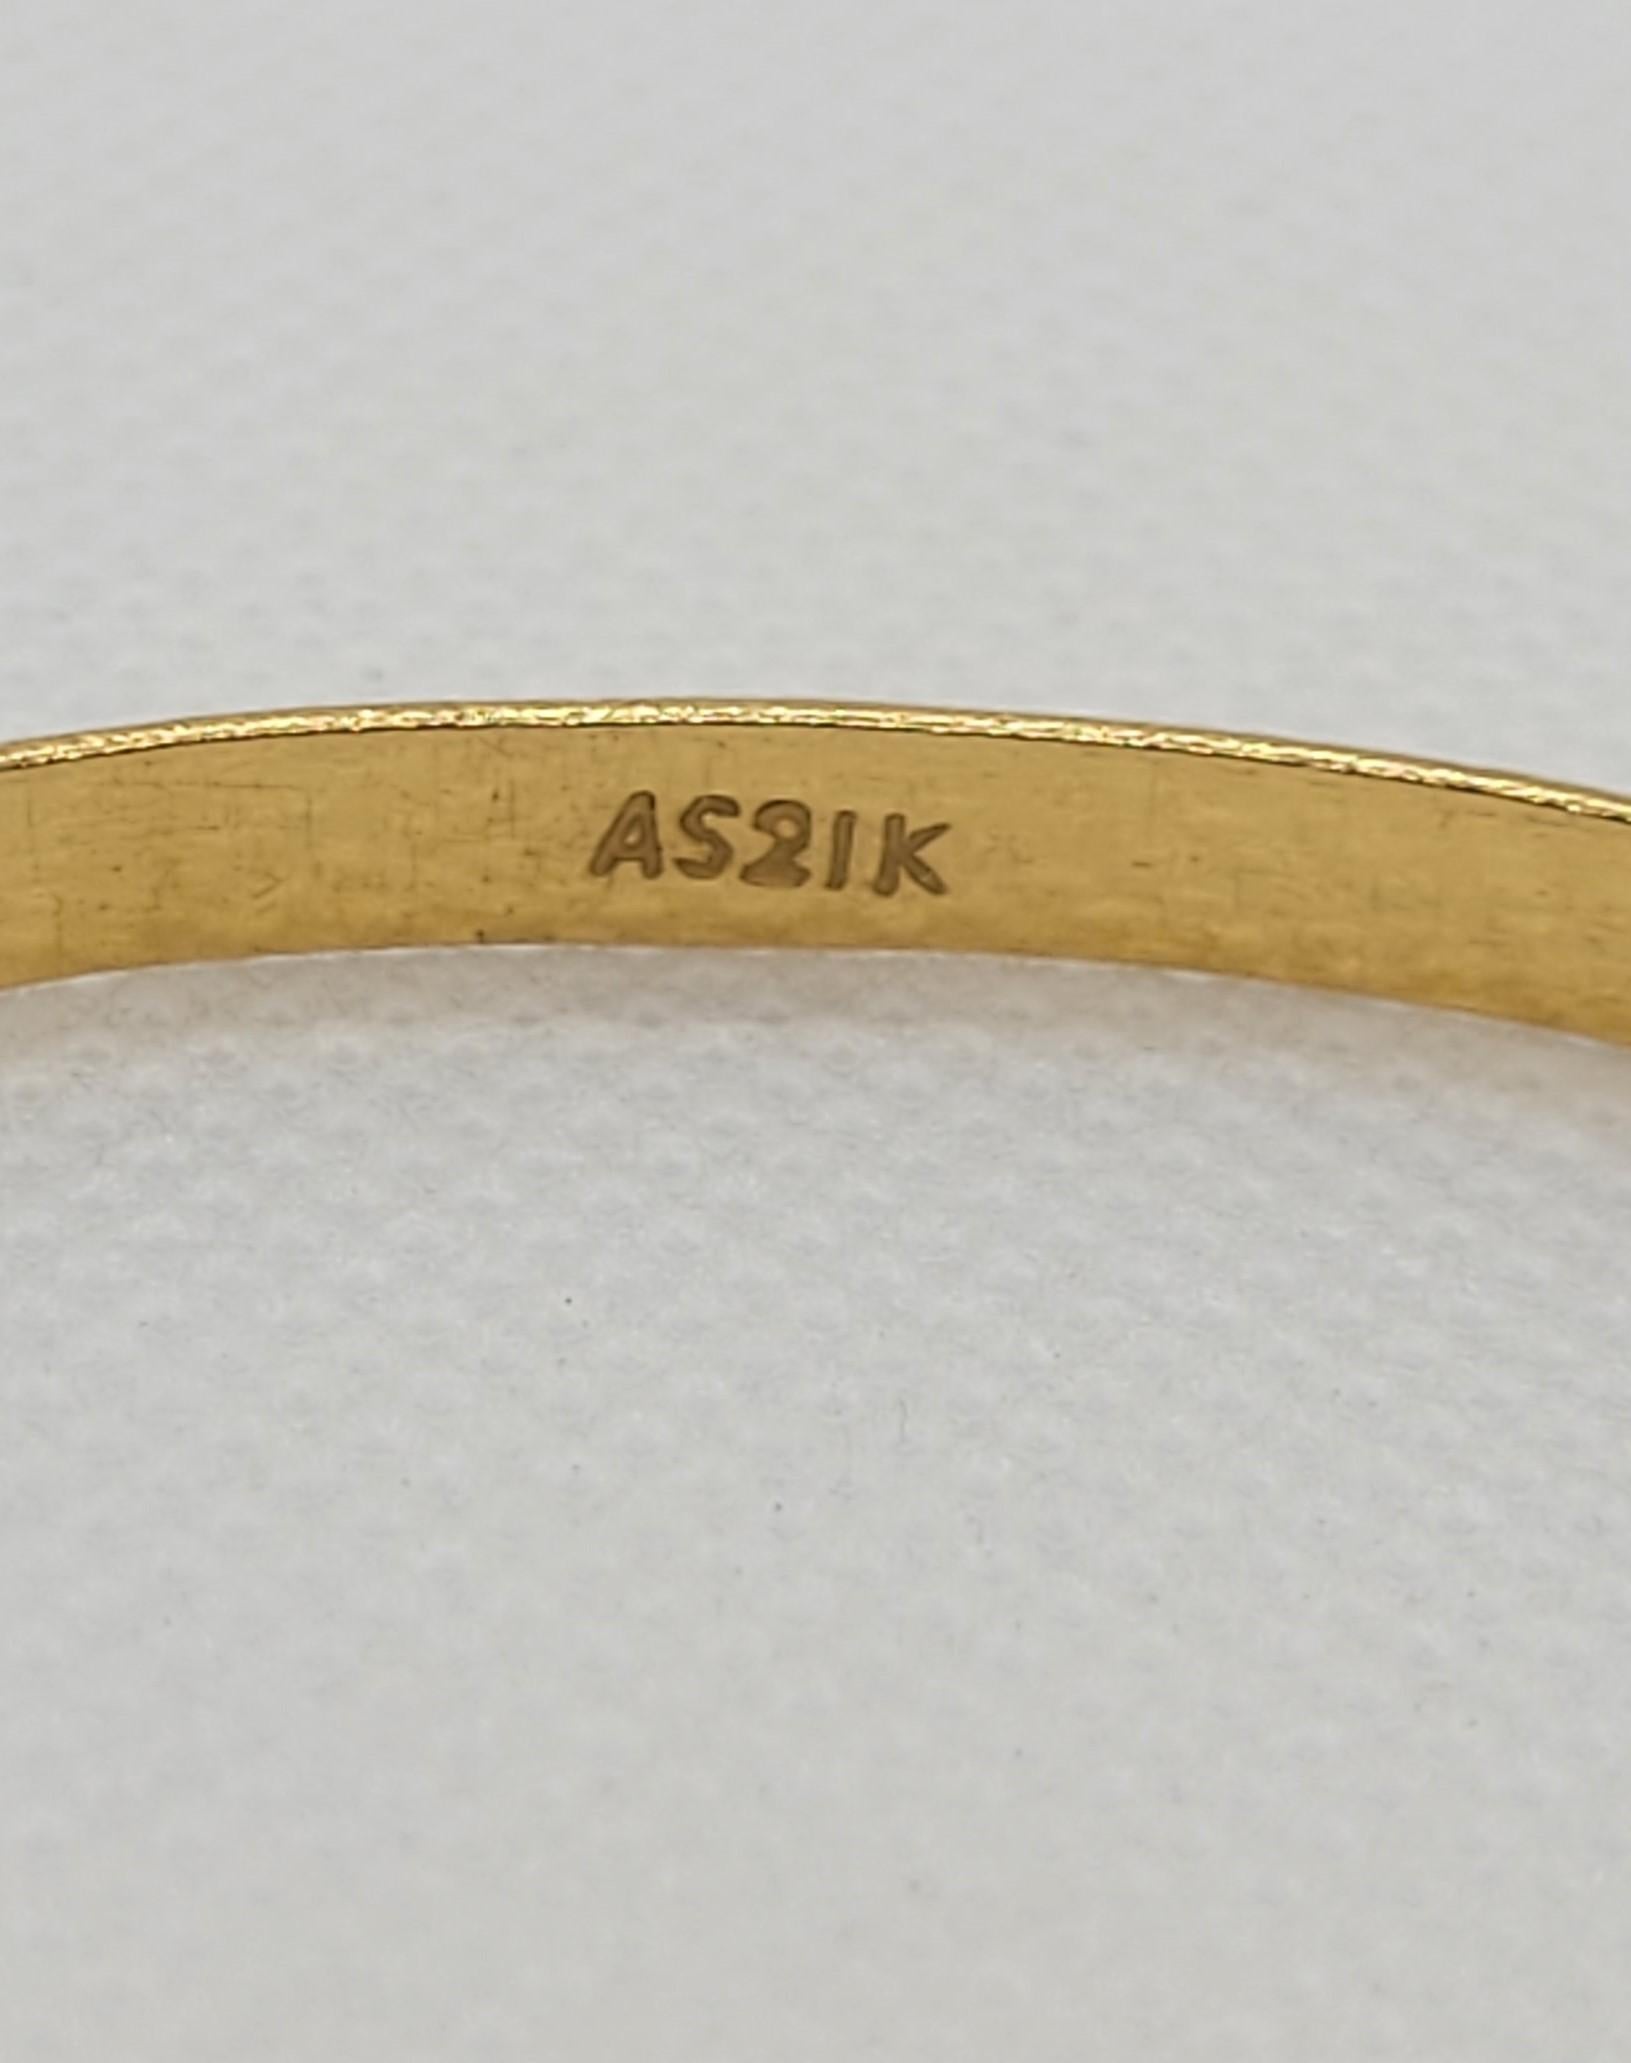 Beautiful 21kt gold bangle bracelet that weighs 10.92 grams. The bracelet has a lovely diamond-cut design, is 4.3 mm wide, 1 mm thick and the diameter is approximately 67mm. The inside of the bangle is stamped AS21K. Overall, the bracelet is in very